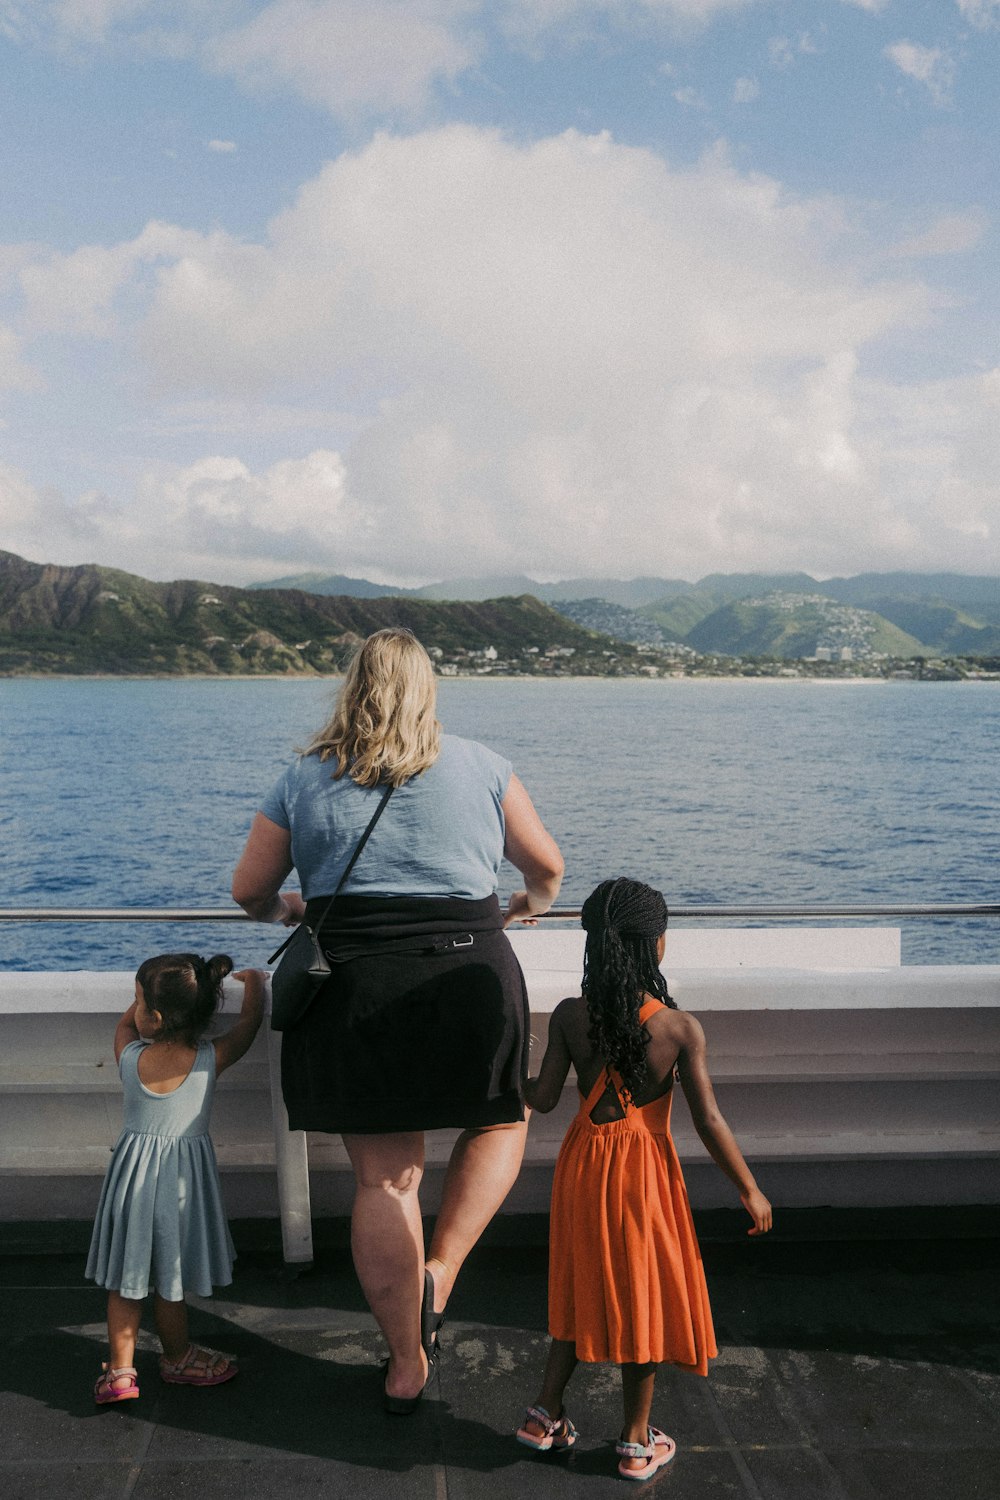 a woman and two children looking at a body of water